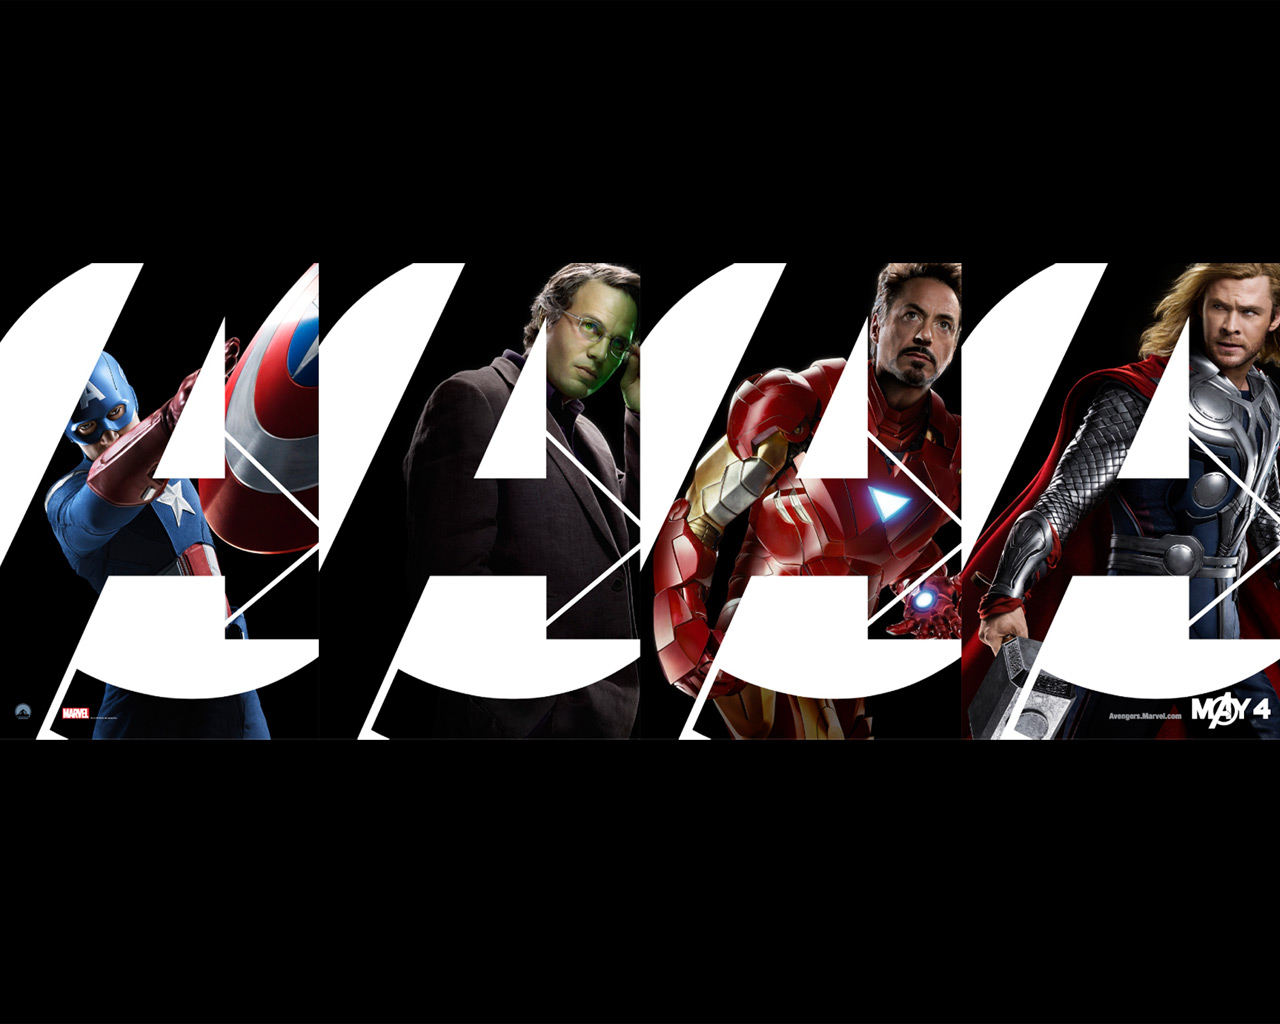 The Avengers 2012 The Ultimate Avengers 2012 The Avengers Assemble 2012 Movie Review Hollywood Movie Movie 2012 Hollywood Movie 2012 Movie Wallpapers